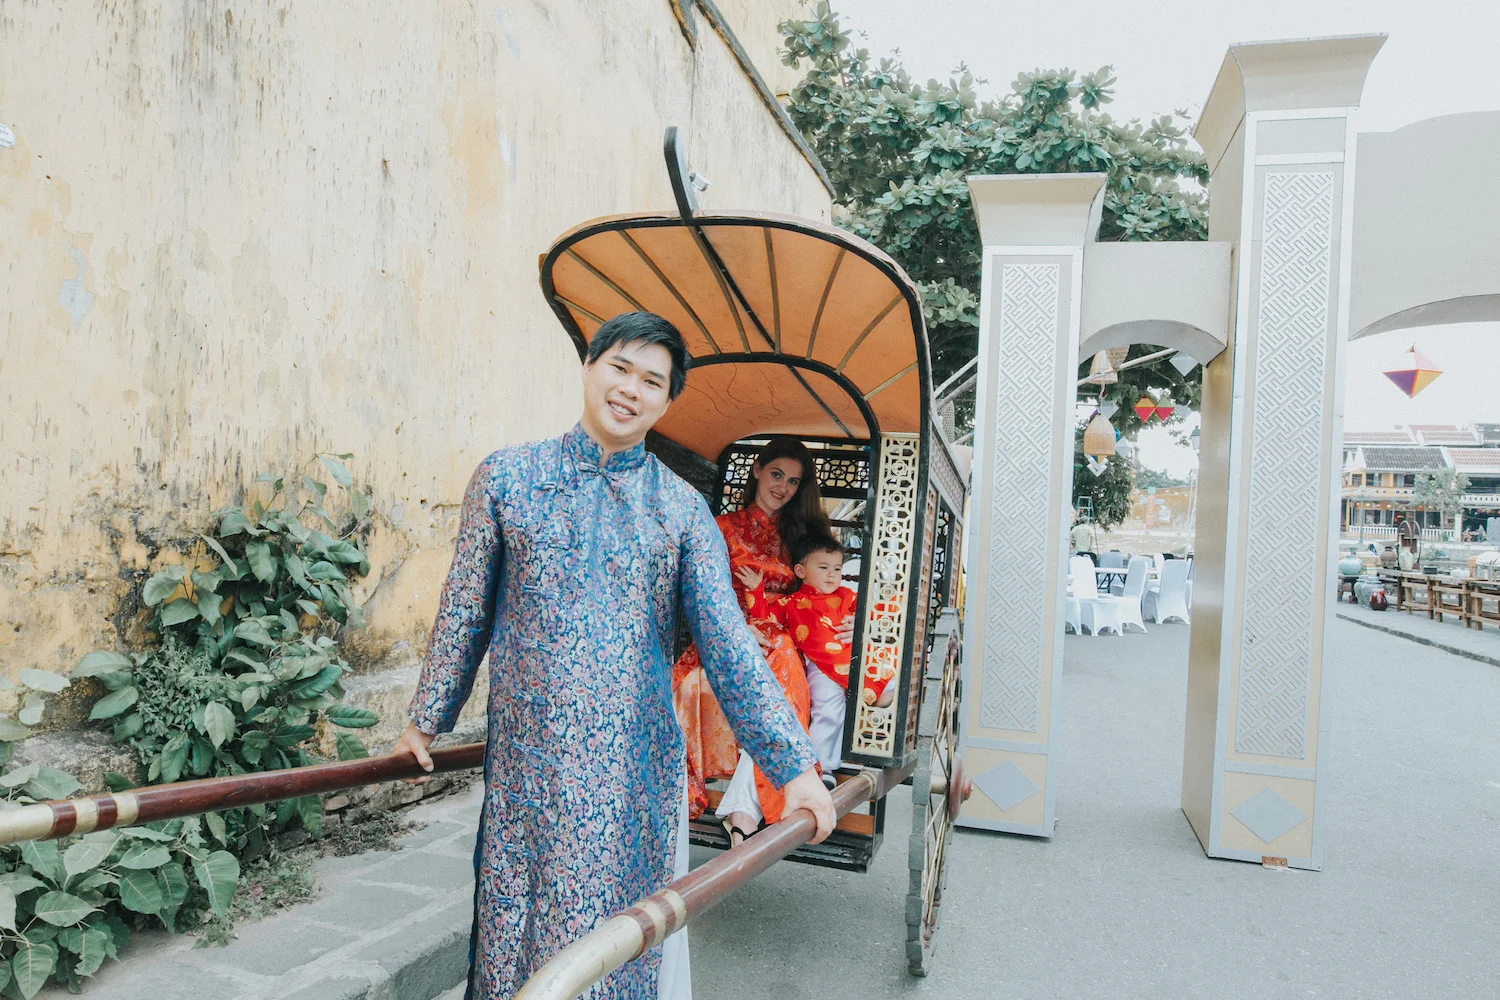 Hoi An Half-Day Pedicab Tour and Ao Dai Wearing Experience